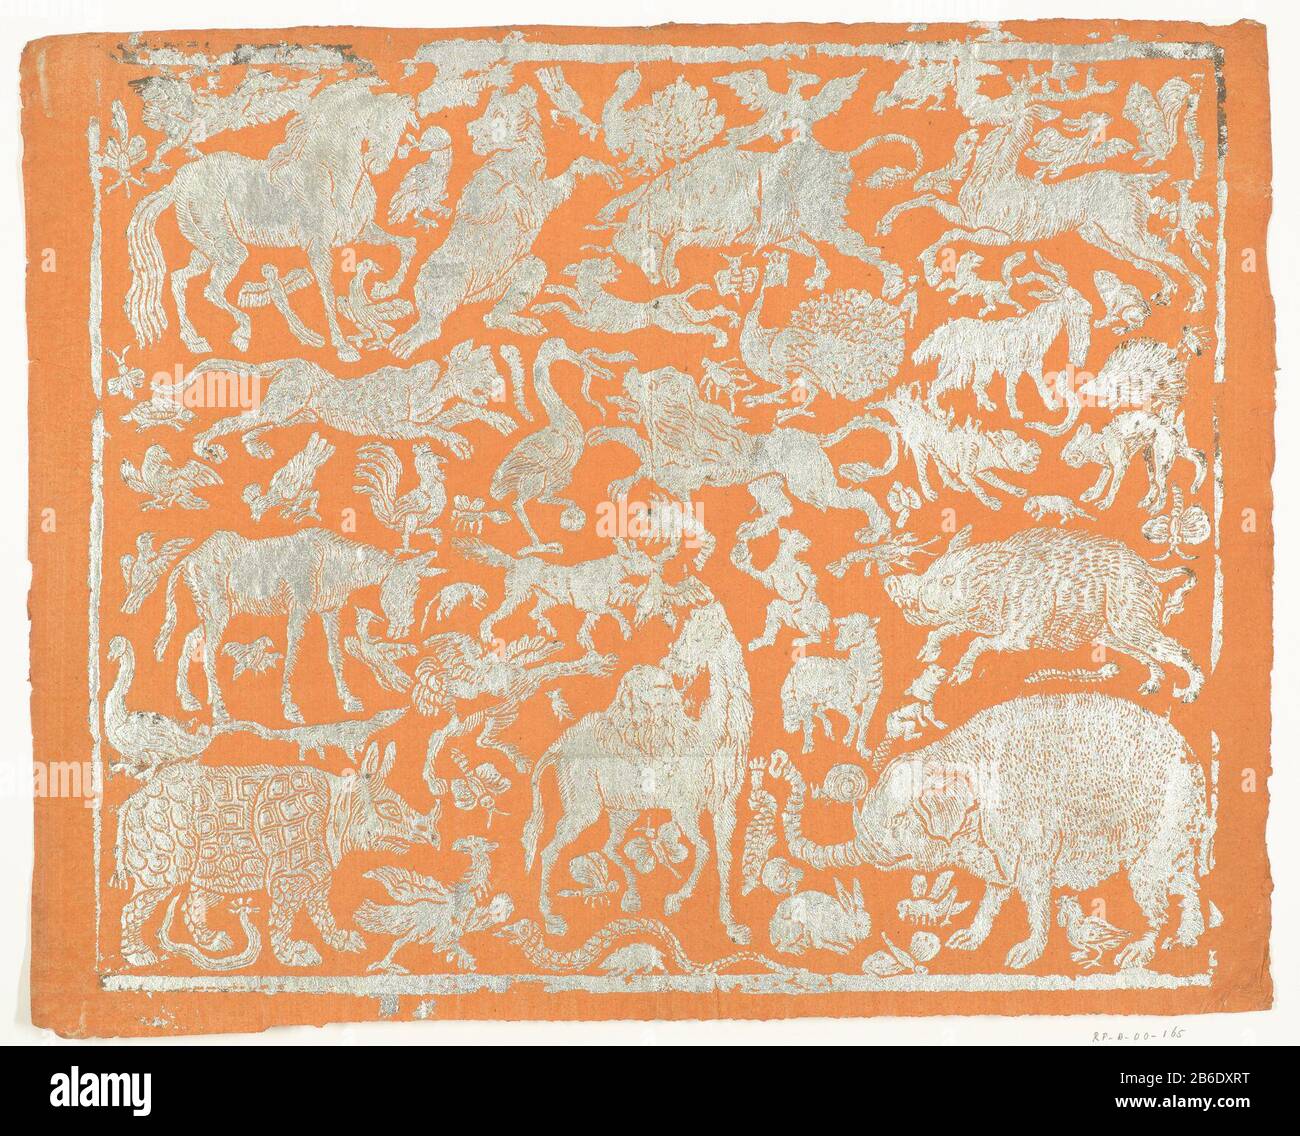 Sheet with animals Leaf with different animals; top left horse right deer, bottom left rhino, bottom right olifant. Manufacturer : Publisher: anonymous Date: 1750 - 1800 Physical characteristics: positive embossed in silver on one color coated paper in orange material: paper silver sheet metal paint technique: embossed dimensions: H 332 mm (complete sheet) × b 399 mm Subject: trunked animals: animals elephanthoofed: rhinocerosdieren Stock Photo